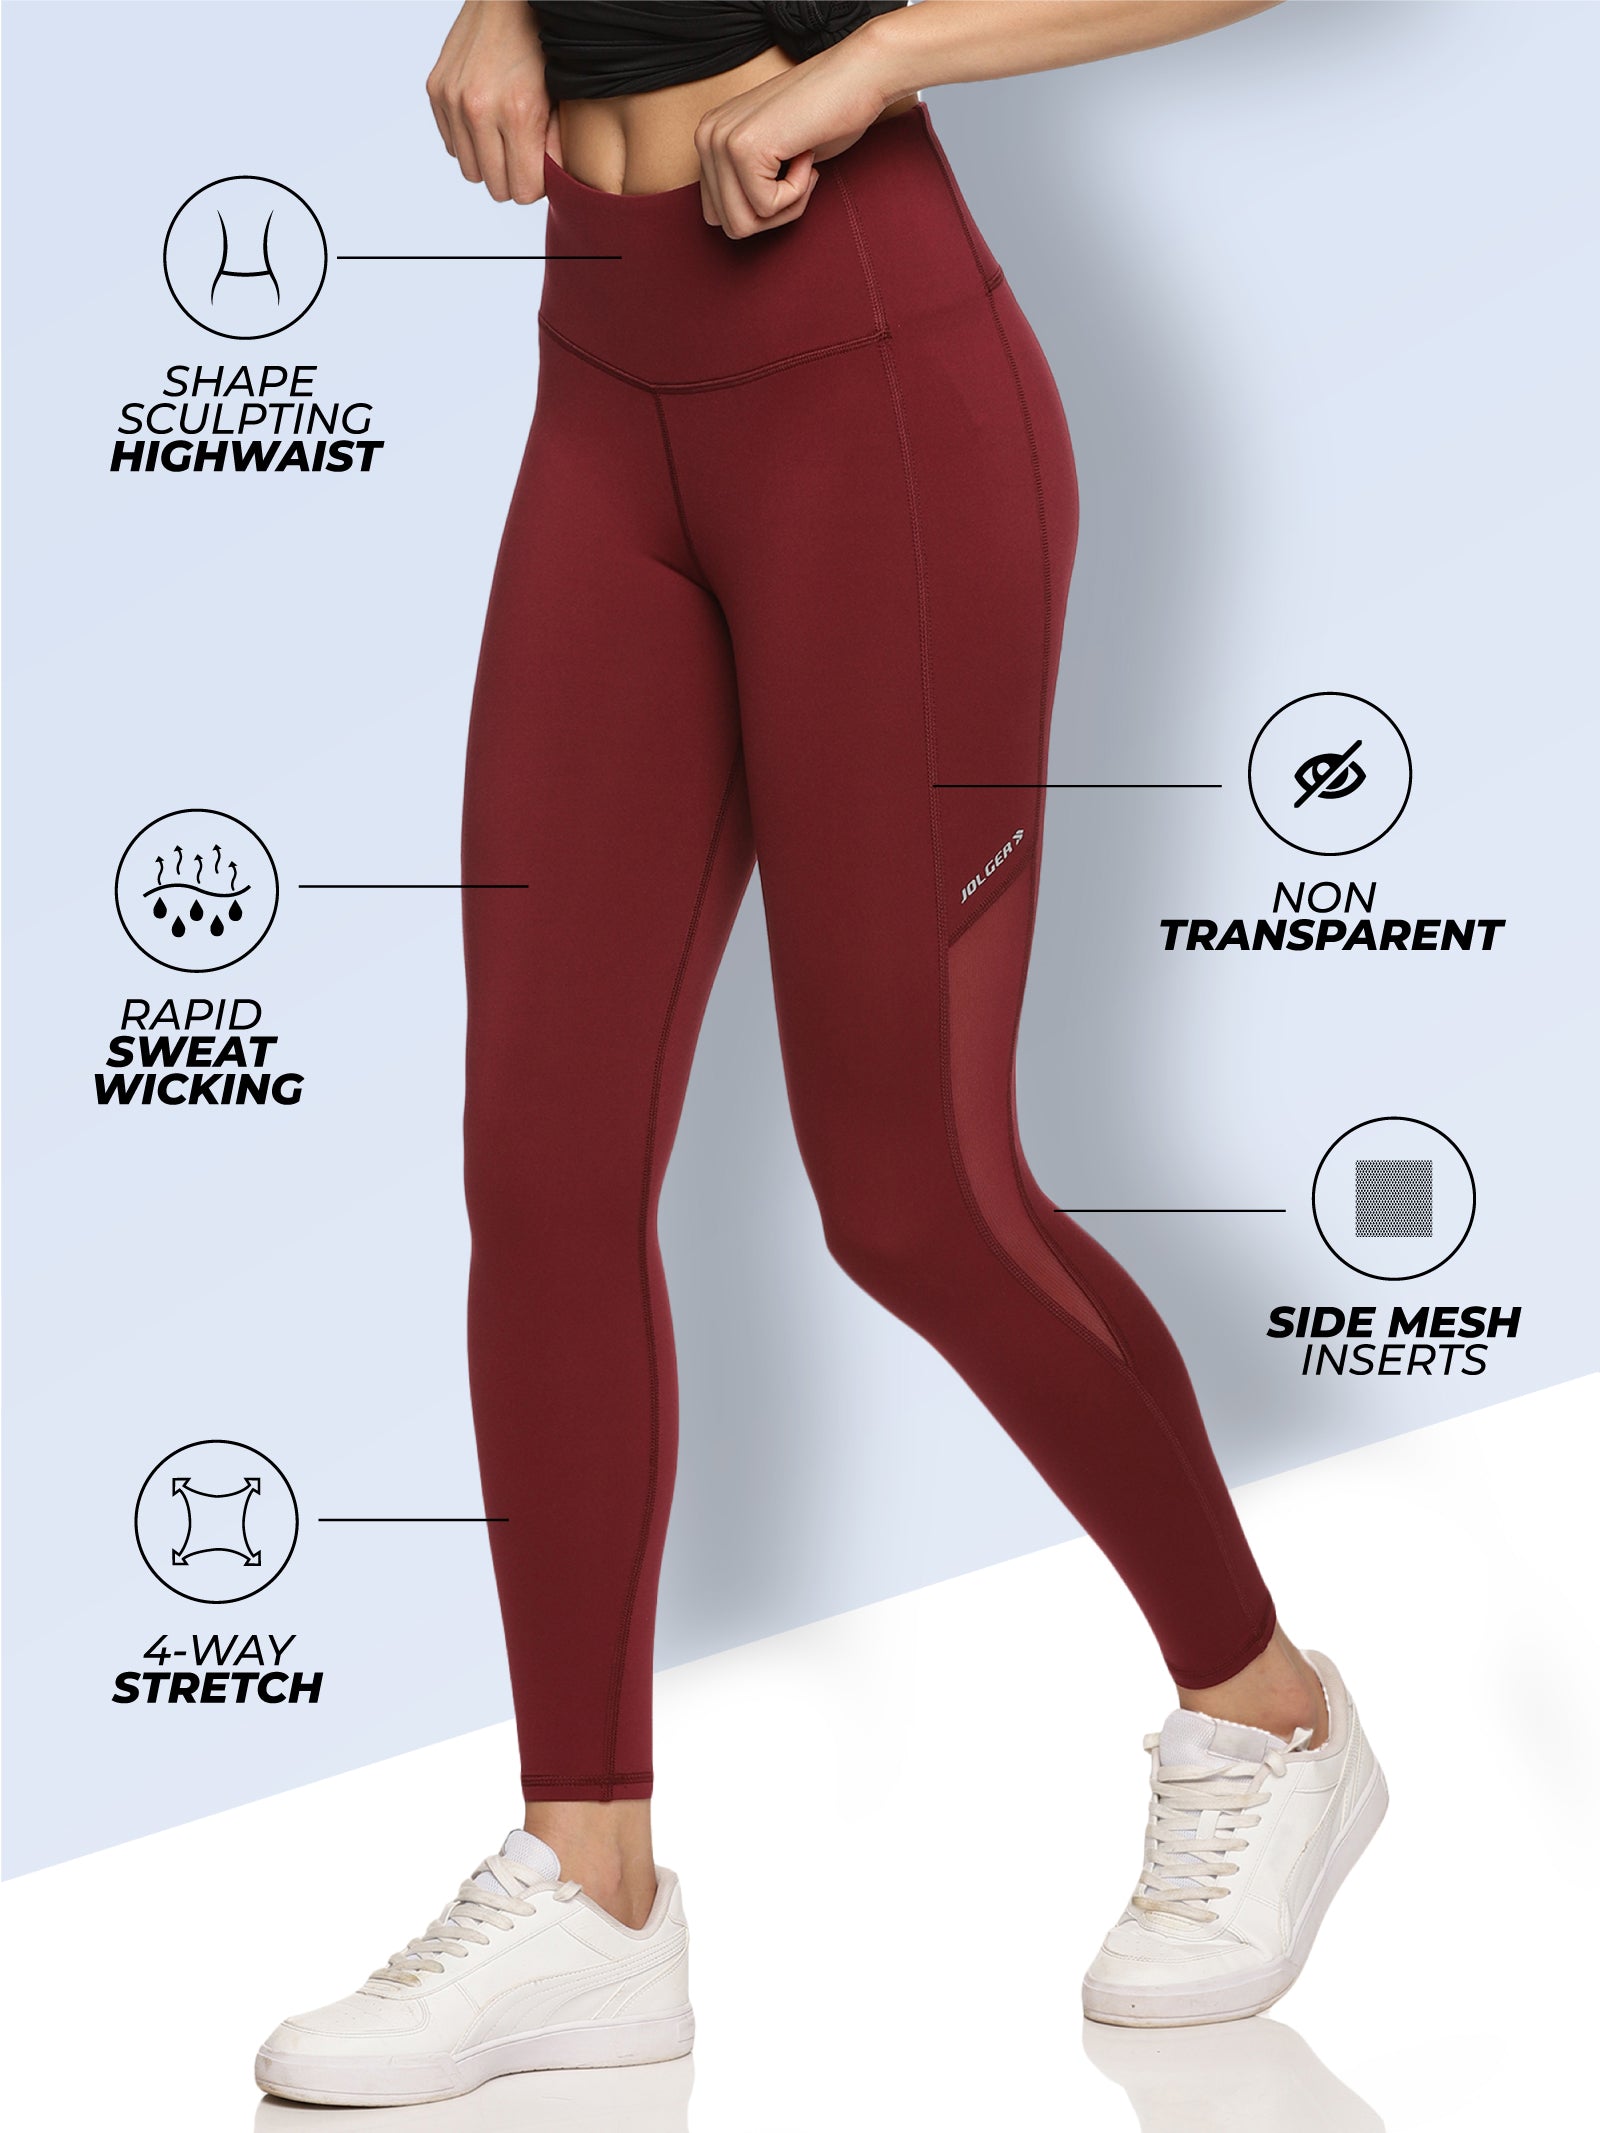  SFASD Leggings for Women, Women's Printed Leggings High Waisted  Buttery Soft Soft Yoga Pants Basic Leggings Gym Tights (Color : Diamond,  Size : XX-Large) : Clothing, Shoes & Jewelry